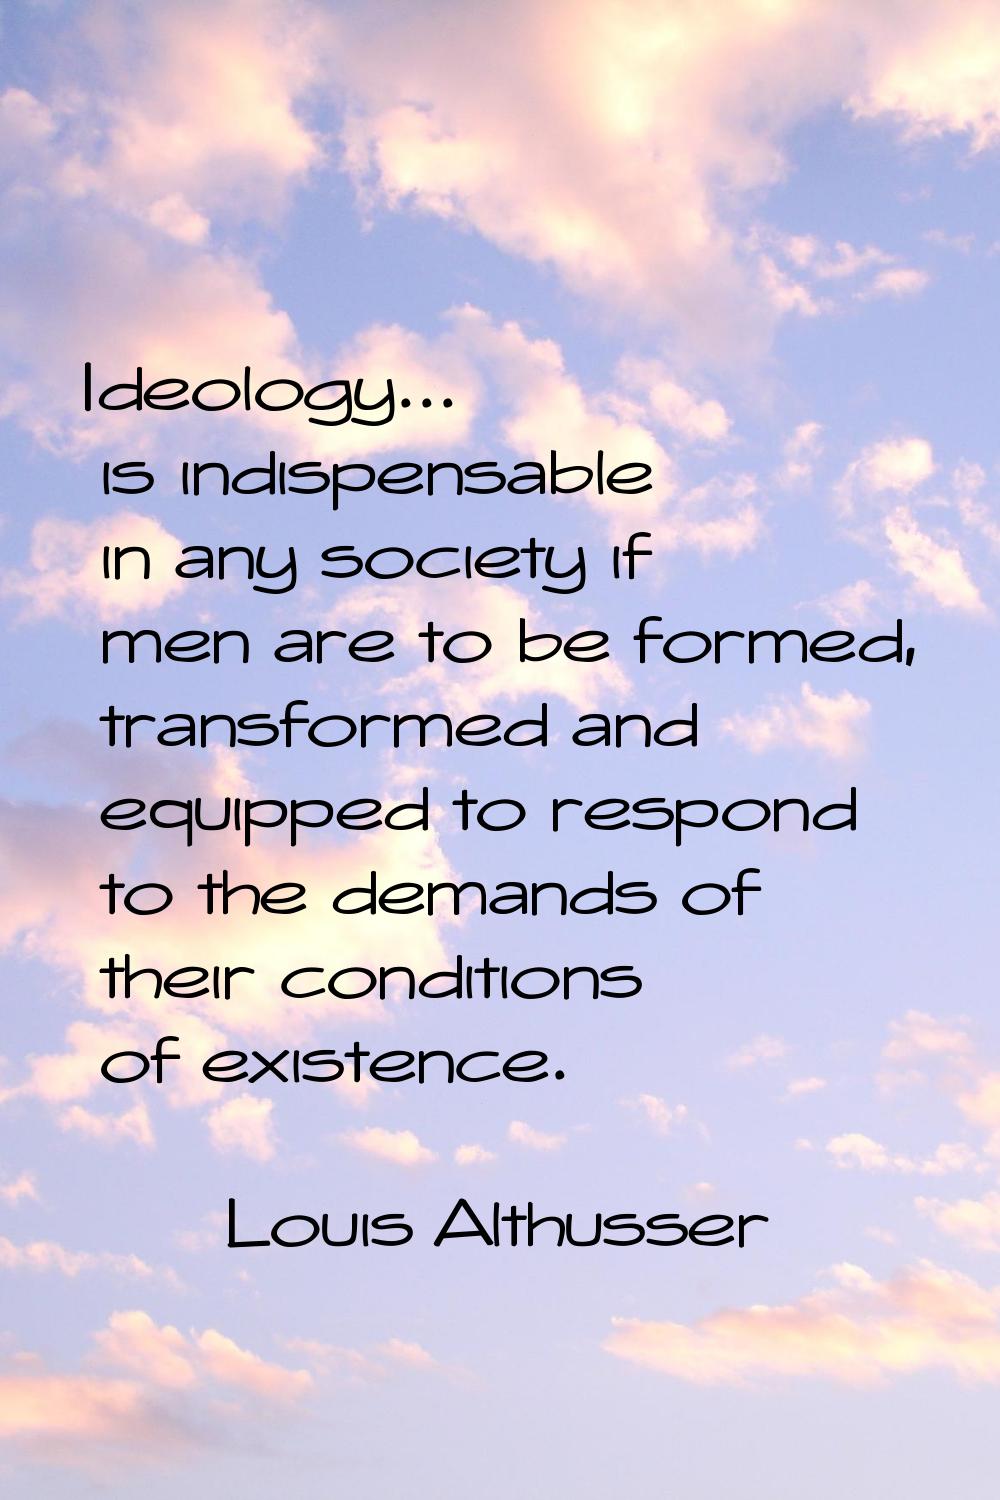 Ideology... is indispensable in any society if men are to be formed, transformed and equipped to re